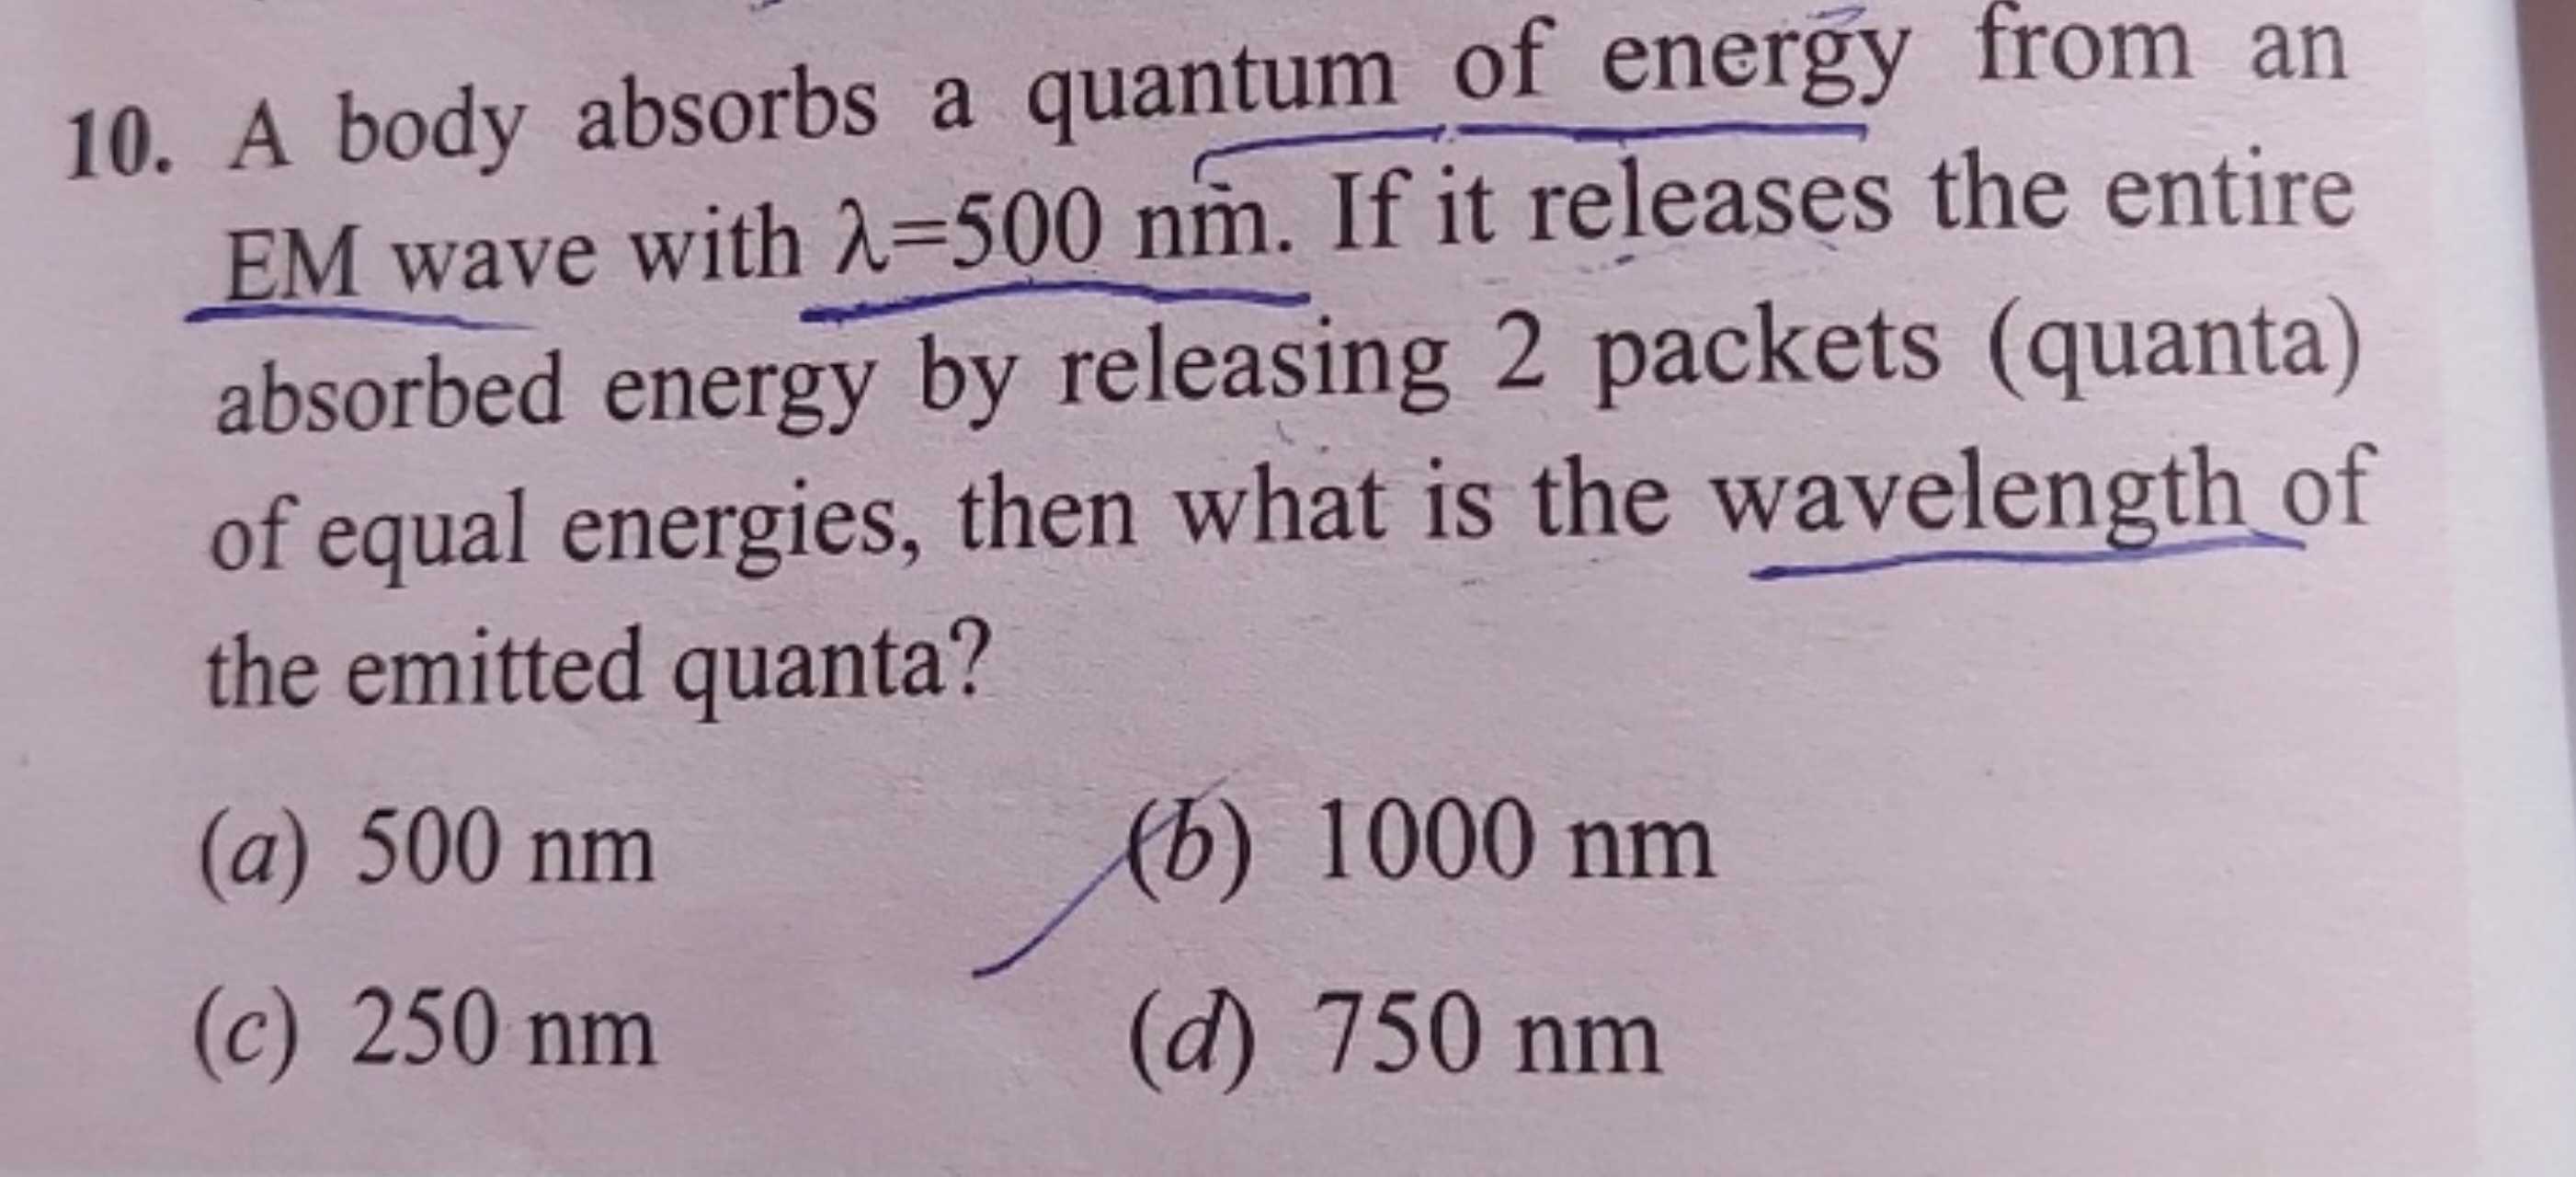 A body absorbs a quantum of energy from an EM wave with λ=500 nm. If i